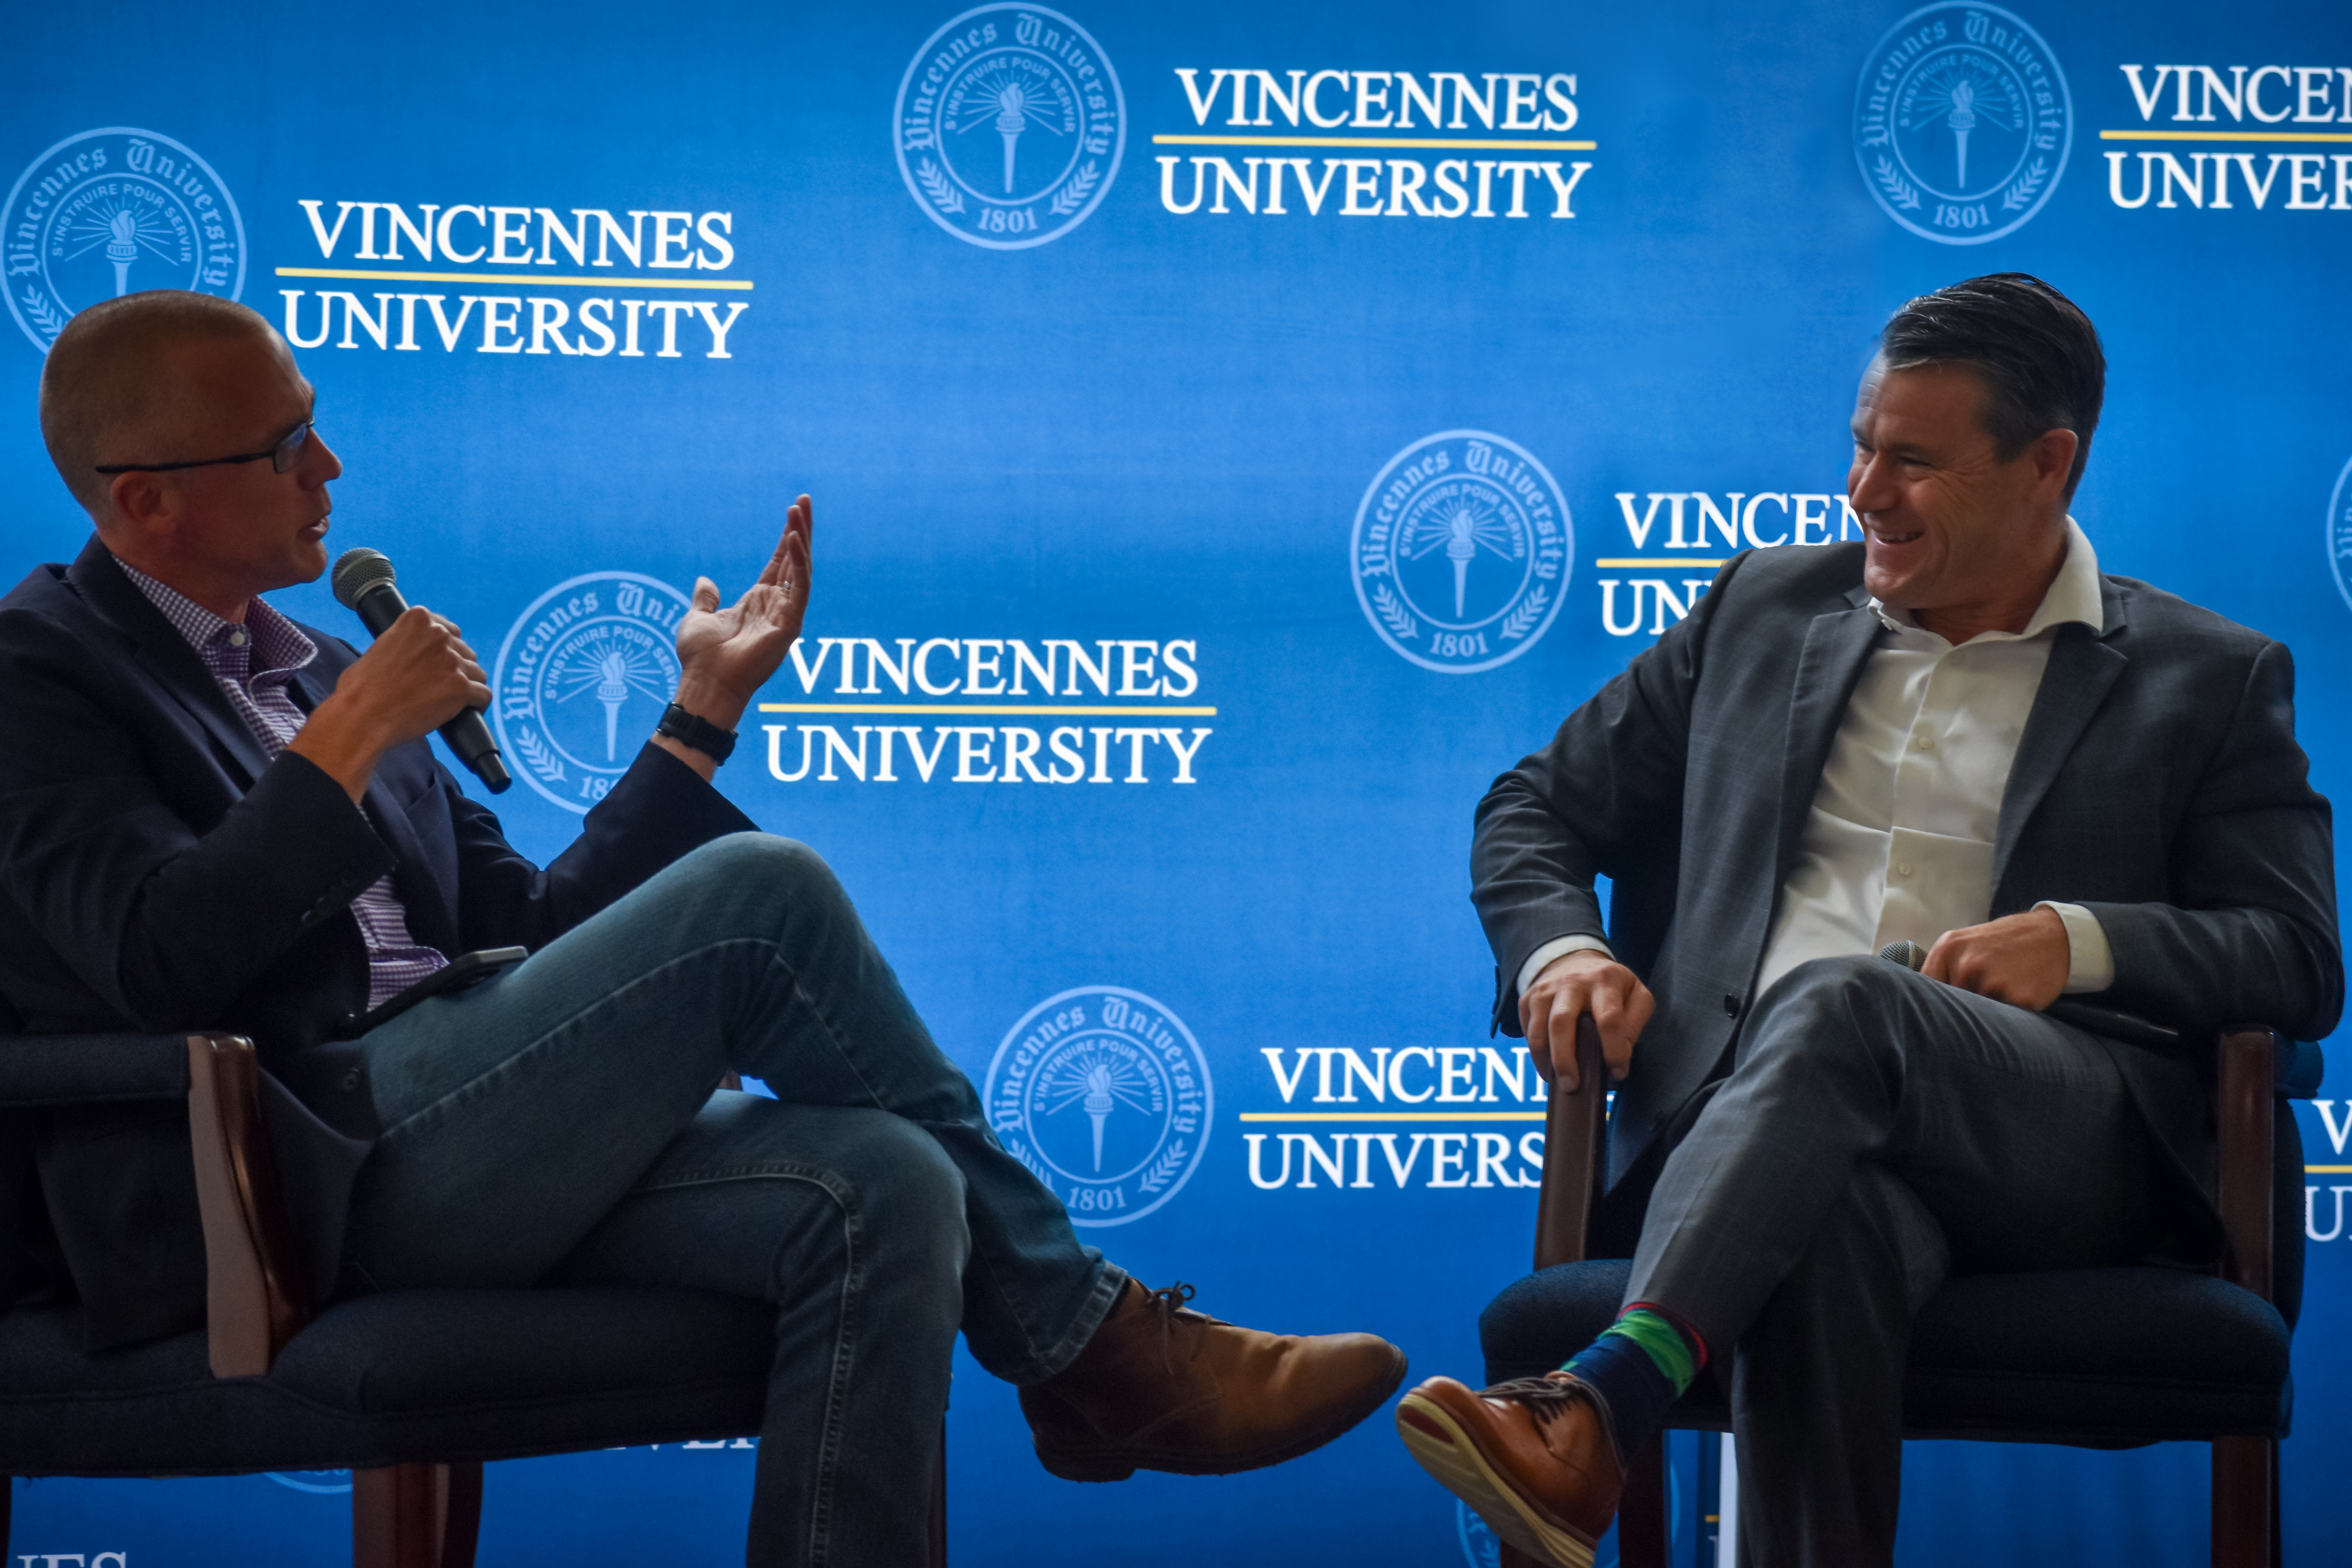 AgriNovus Indiana's Mitch Frazier and U.S. Senator Todd Young sit in chairs in front of VU backdrop during a fireside chat at VU's Agricultural Center.